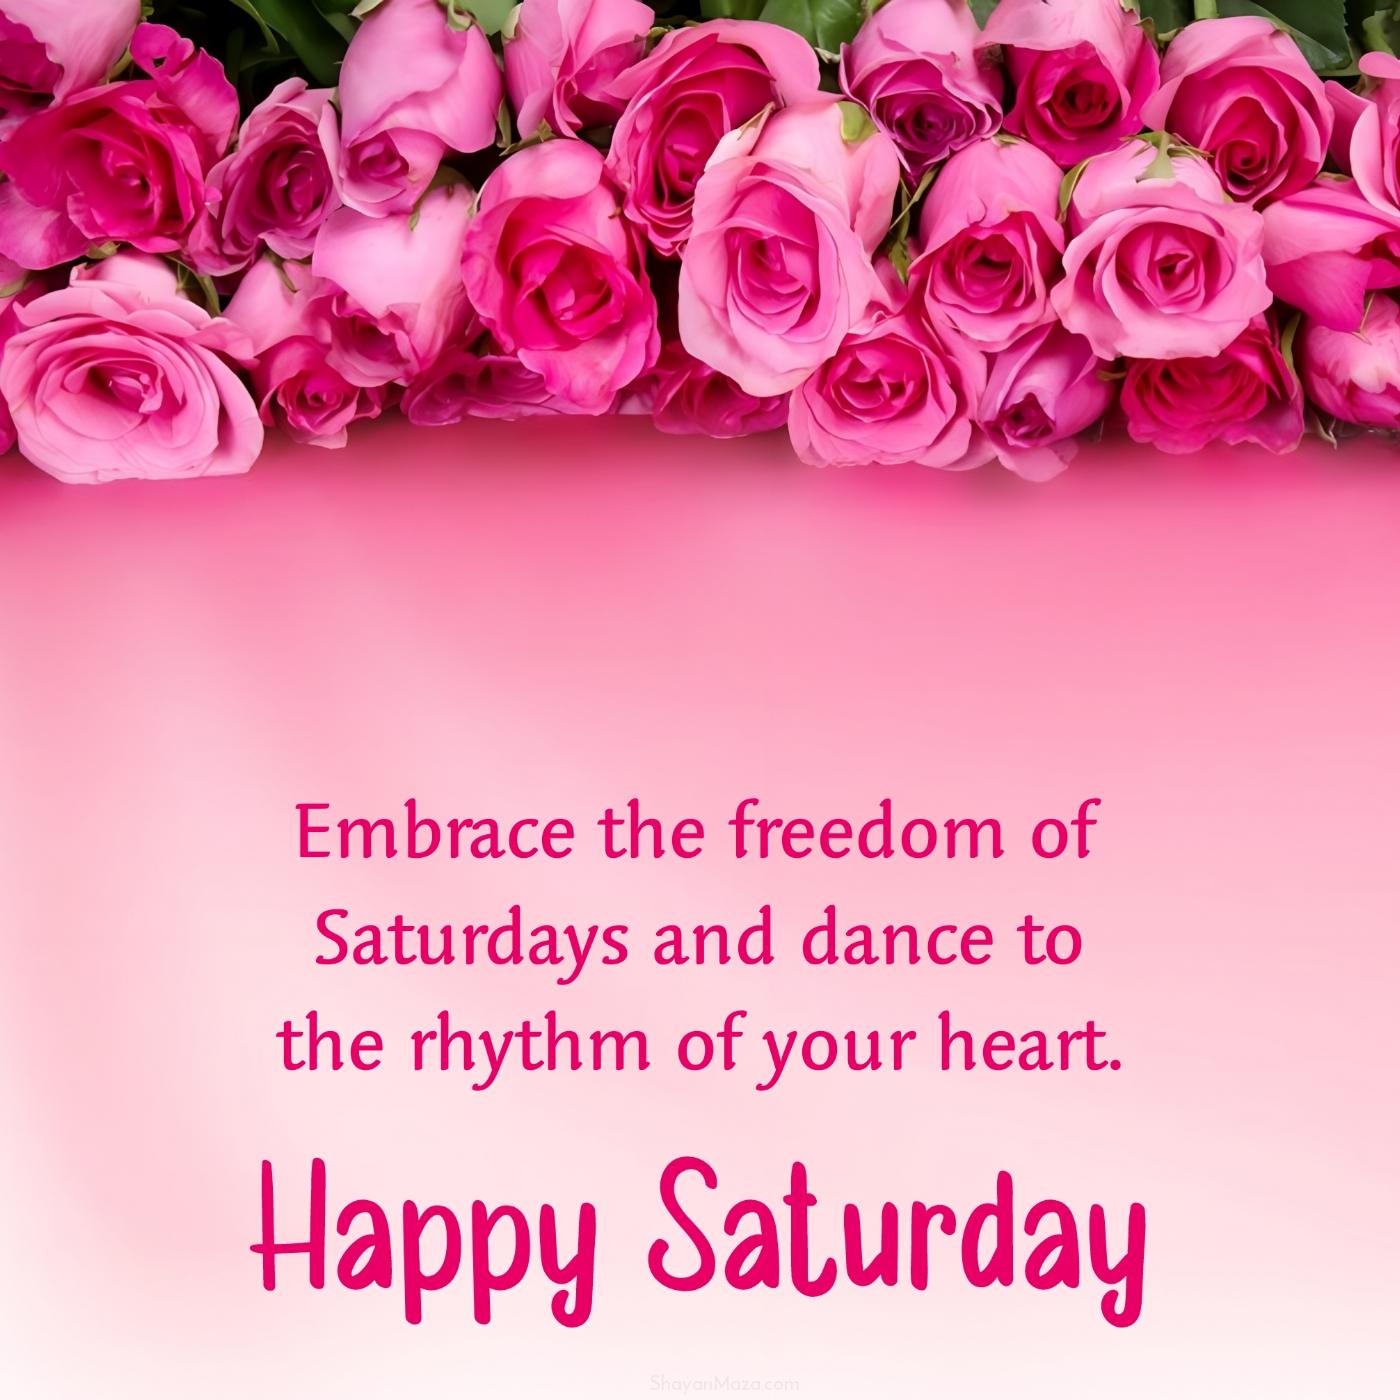 Embrace the freedom of Saturdays and dance to the rhythm